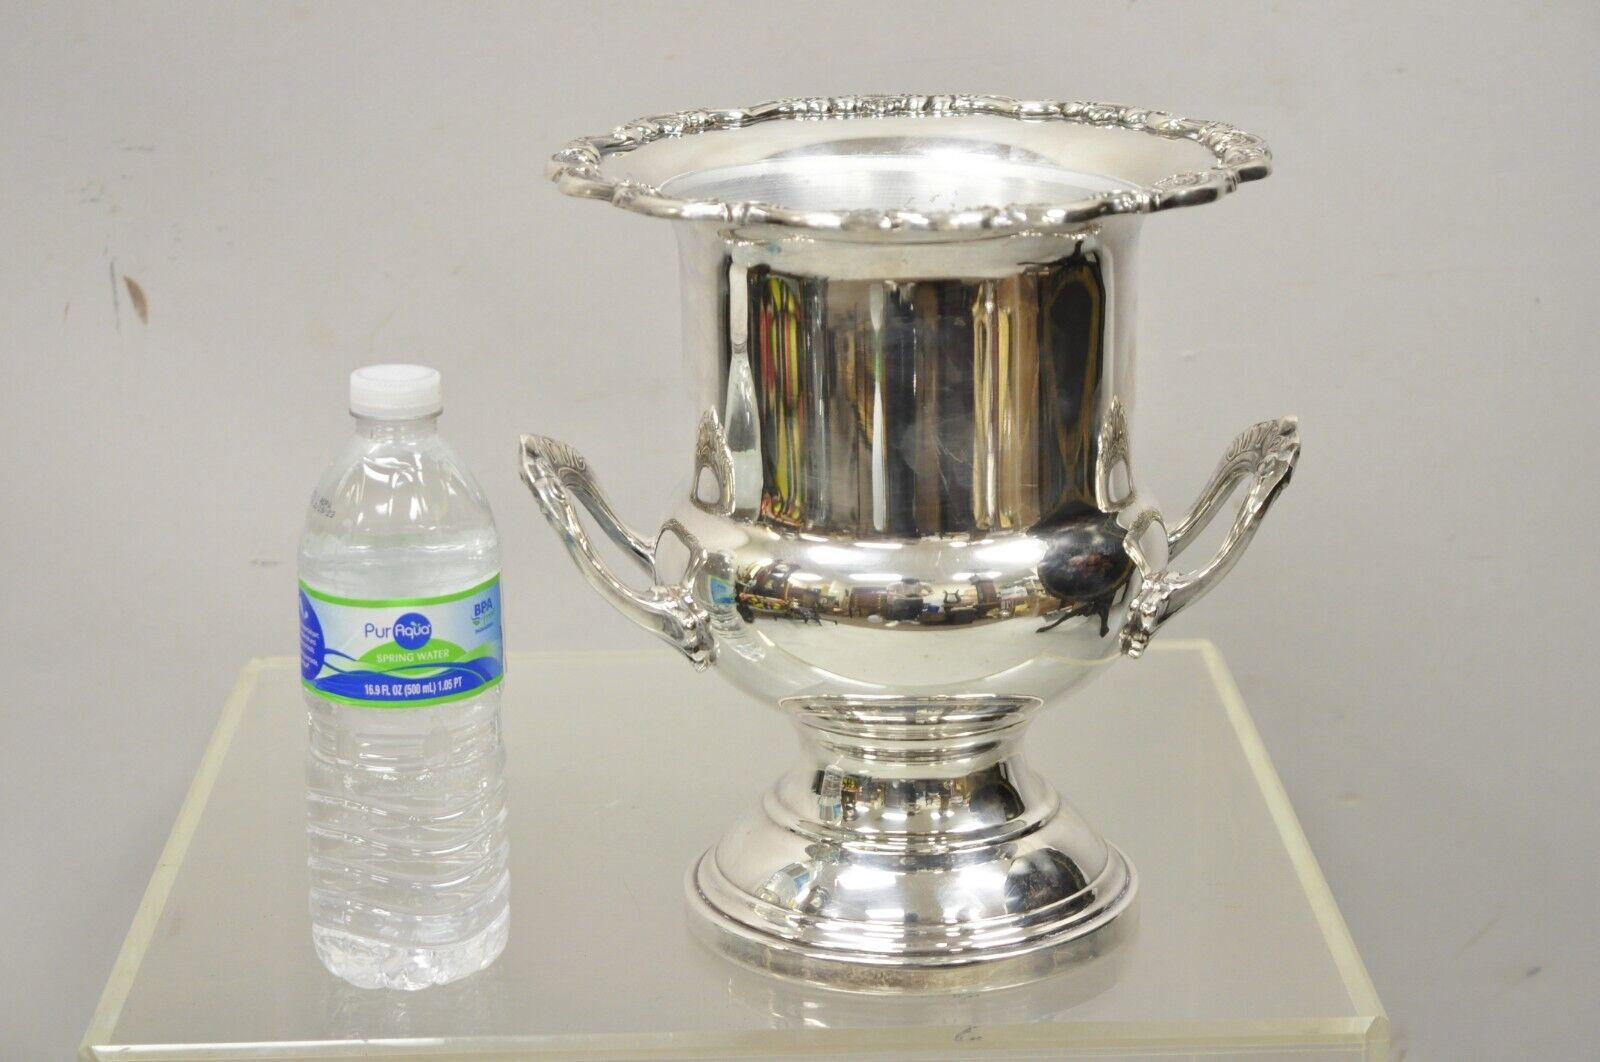 Gorham Heritage silver plated YH 343 Champagne Chiller wine ice bucket. Item features a removable aluminum liner, twin handles, original stamp, very nice vintage item, great style and form. Circa Mid 20th Century. Measurements: 10.25